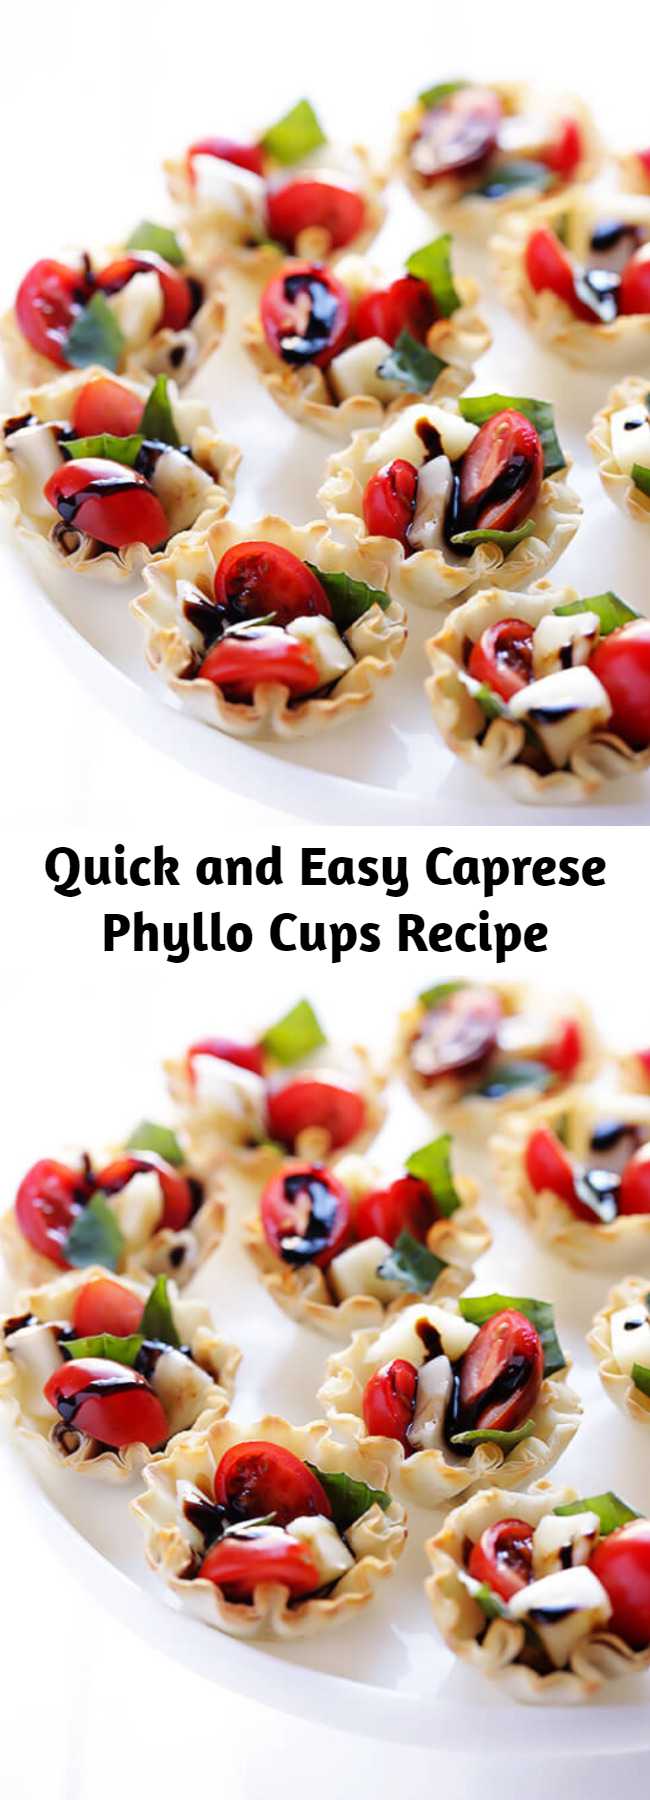 Quick and Easy Caprese Phyllo Cups Recipe - All you need are 5 ingredients to make these easy Phyllo Caprese Cups. They are the perfect appetizer!